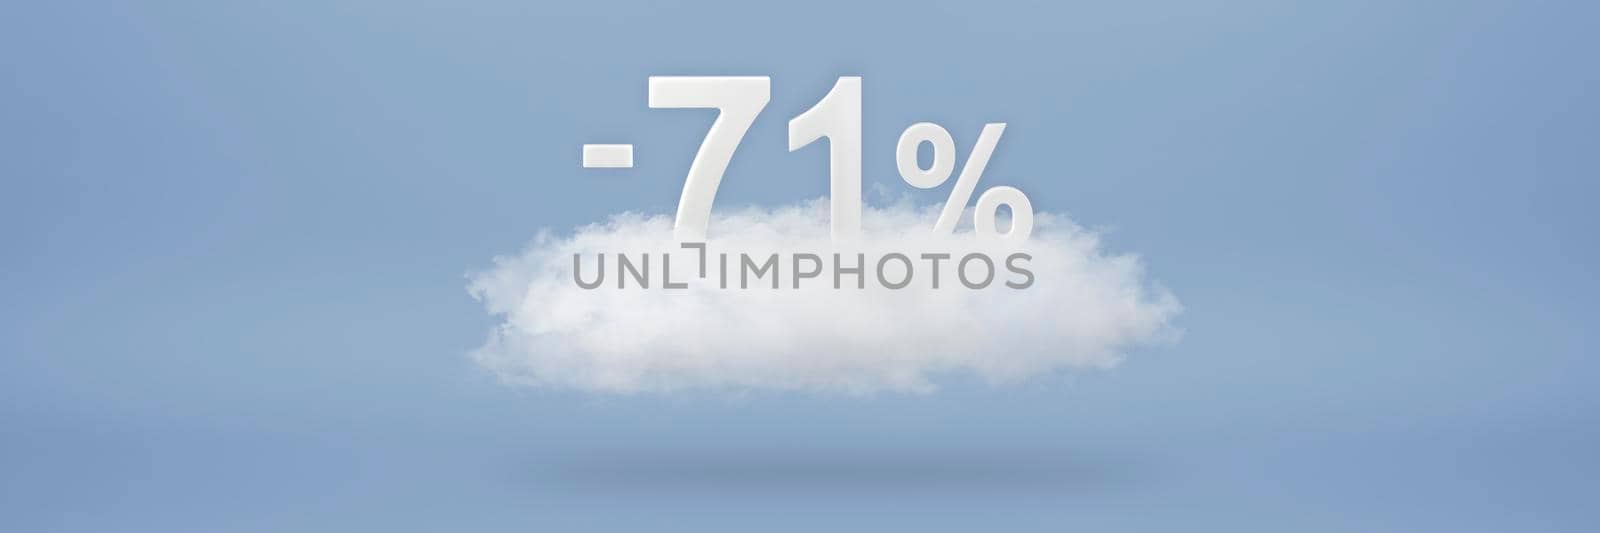 Discount 71 percent. Big discounts, sale up to seventy one percent. 3D numbers float on a cloud on a blue background. Copy space. Advertising banner and poster to be inserted into the project by SERSOL